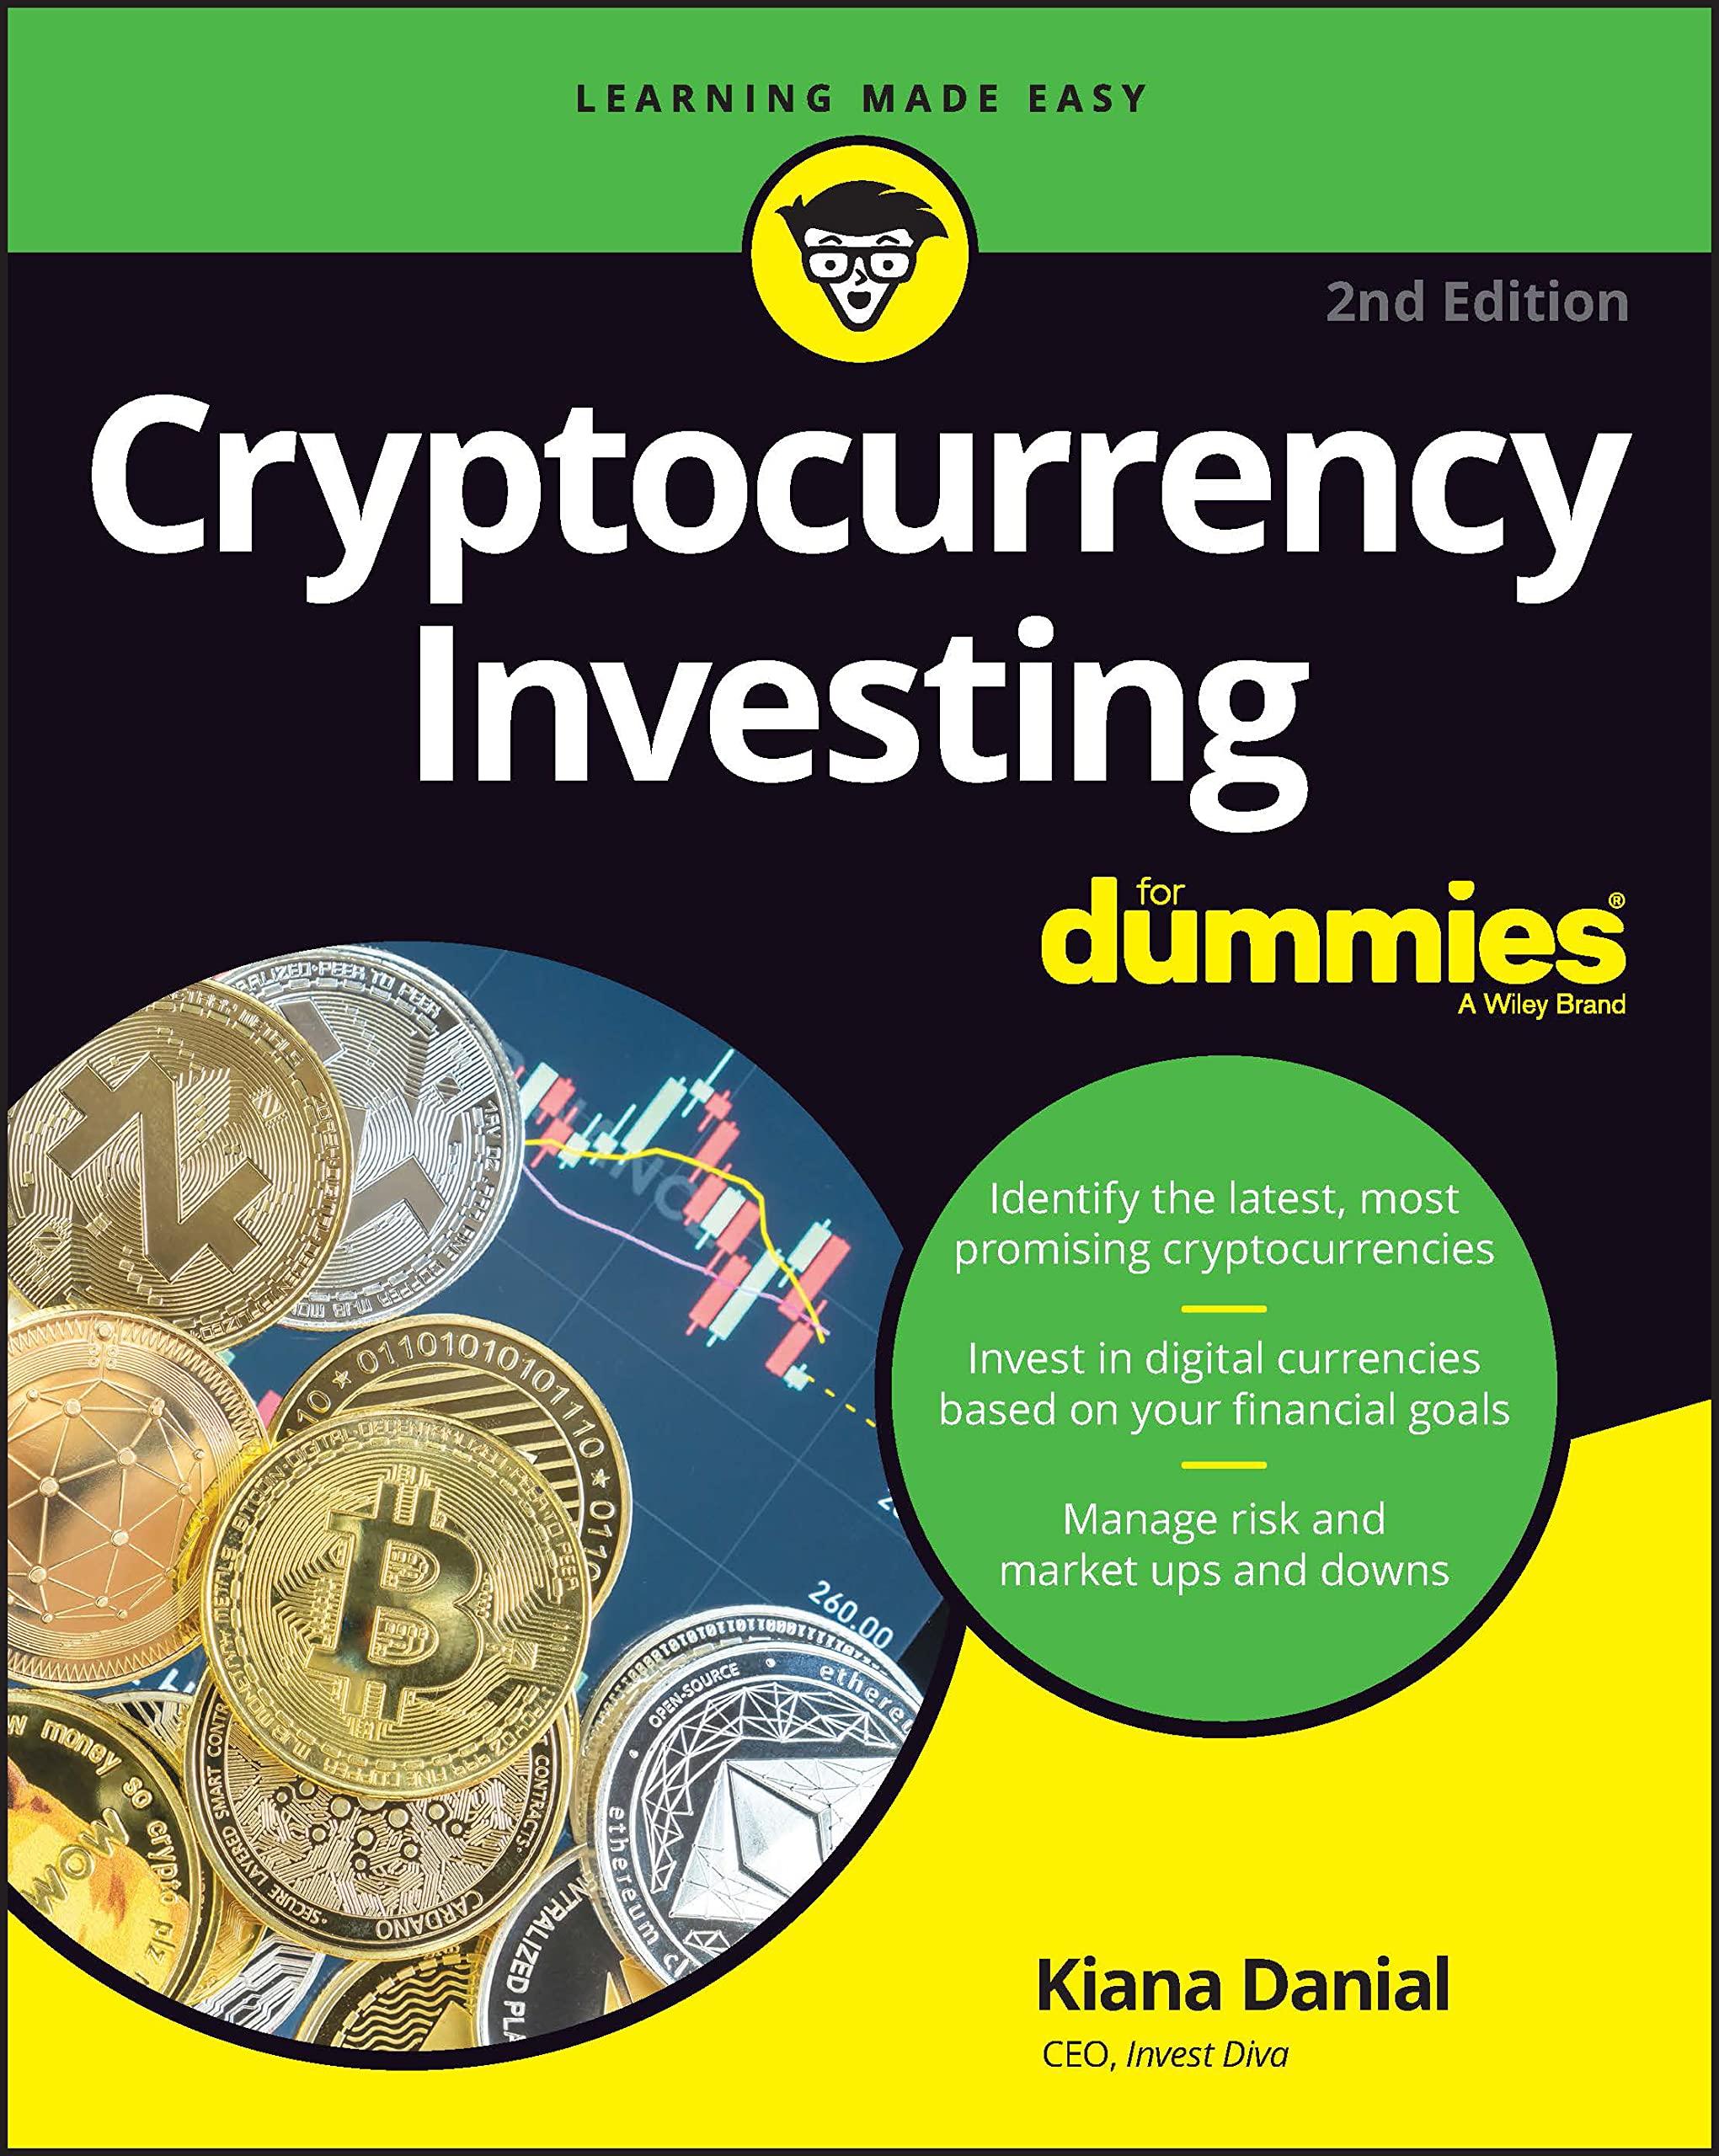 cryptocurrency investing for dummies 2nd edition kiana danial 1119989124, 978-1119989127